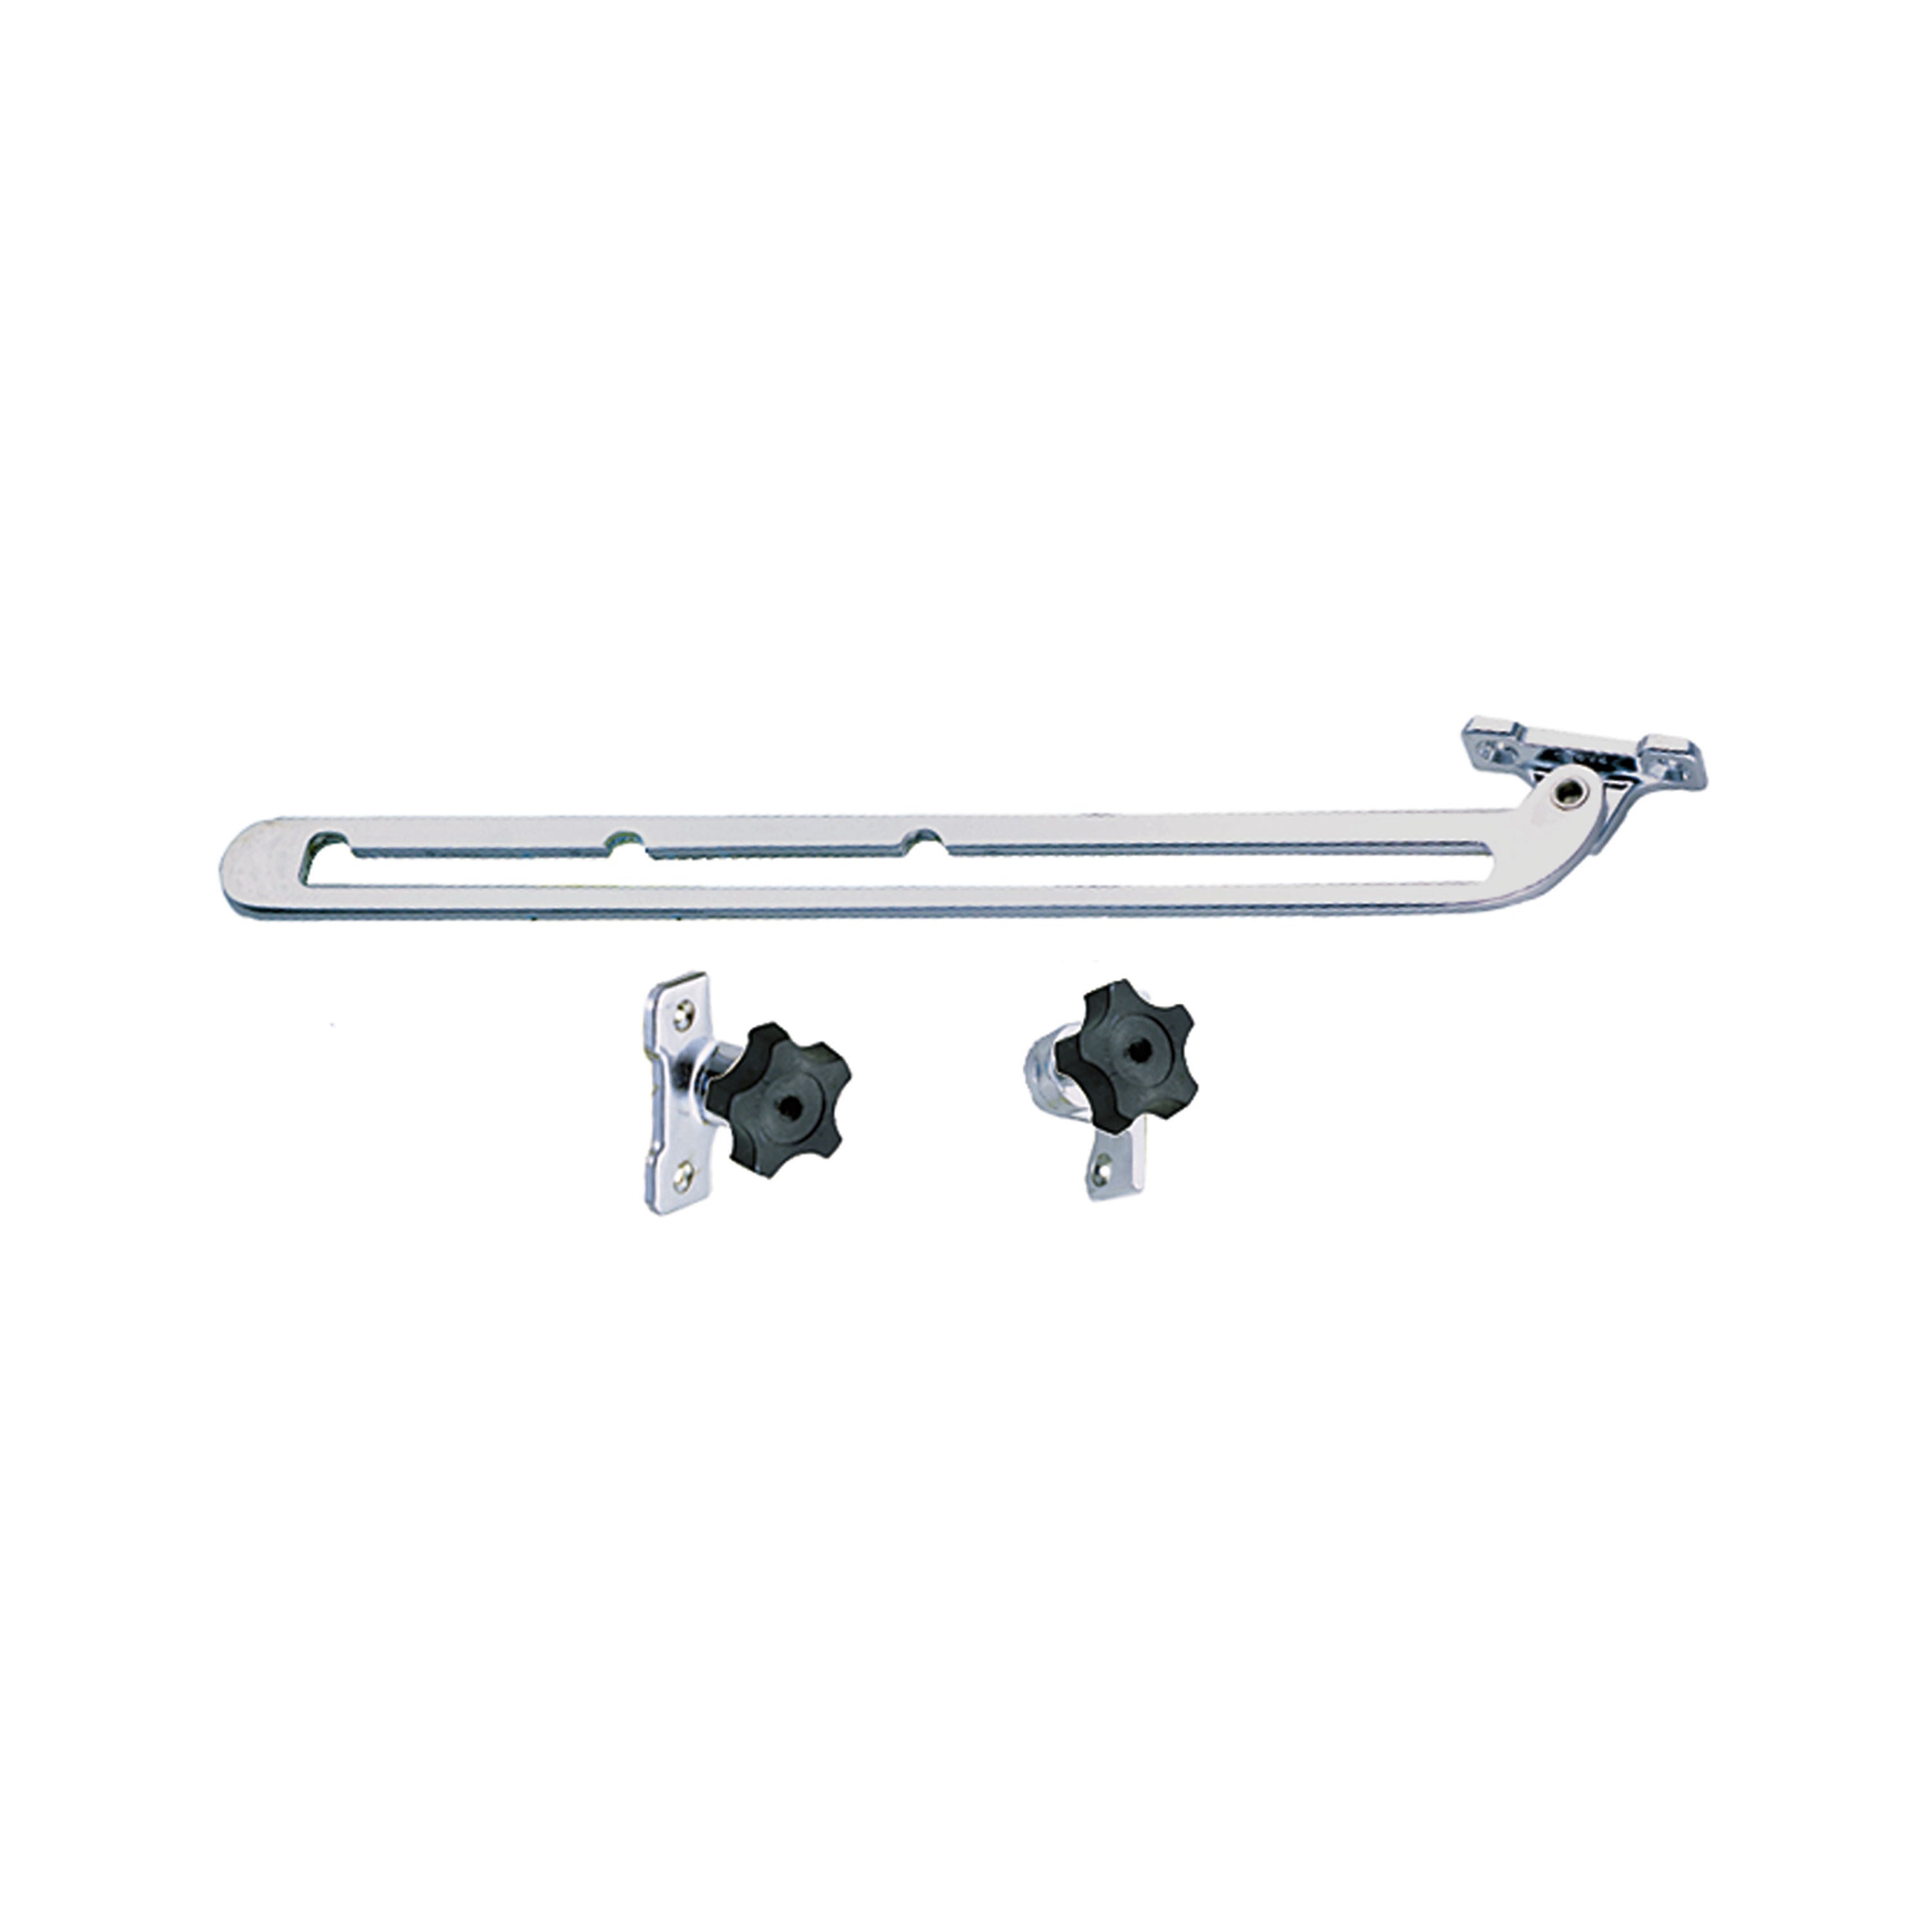 Perko 1290DP0CHR Chrome-Plated Size-Mount Windshield Adjuster - 12" Length with 9.5" Length Adjustment